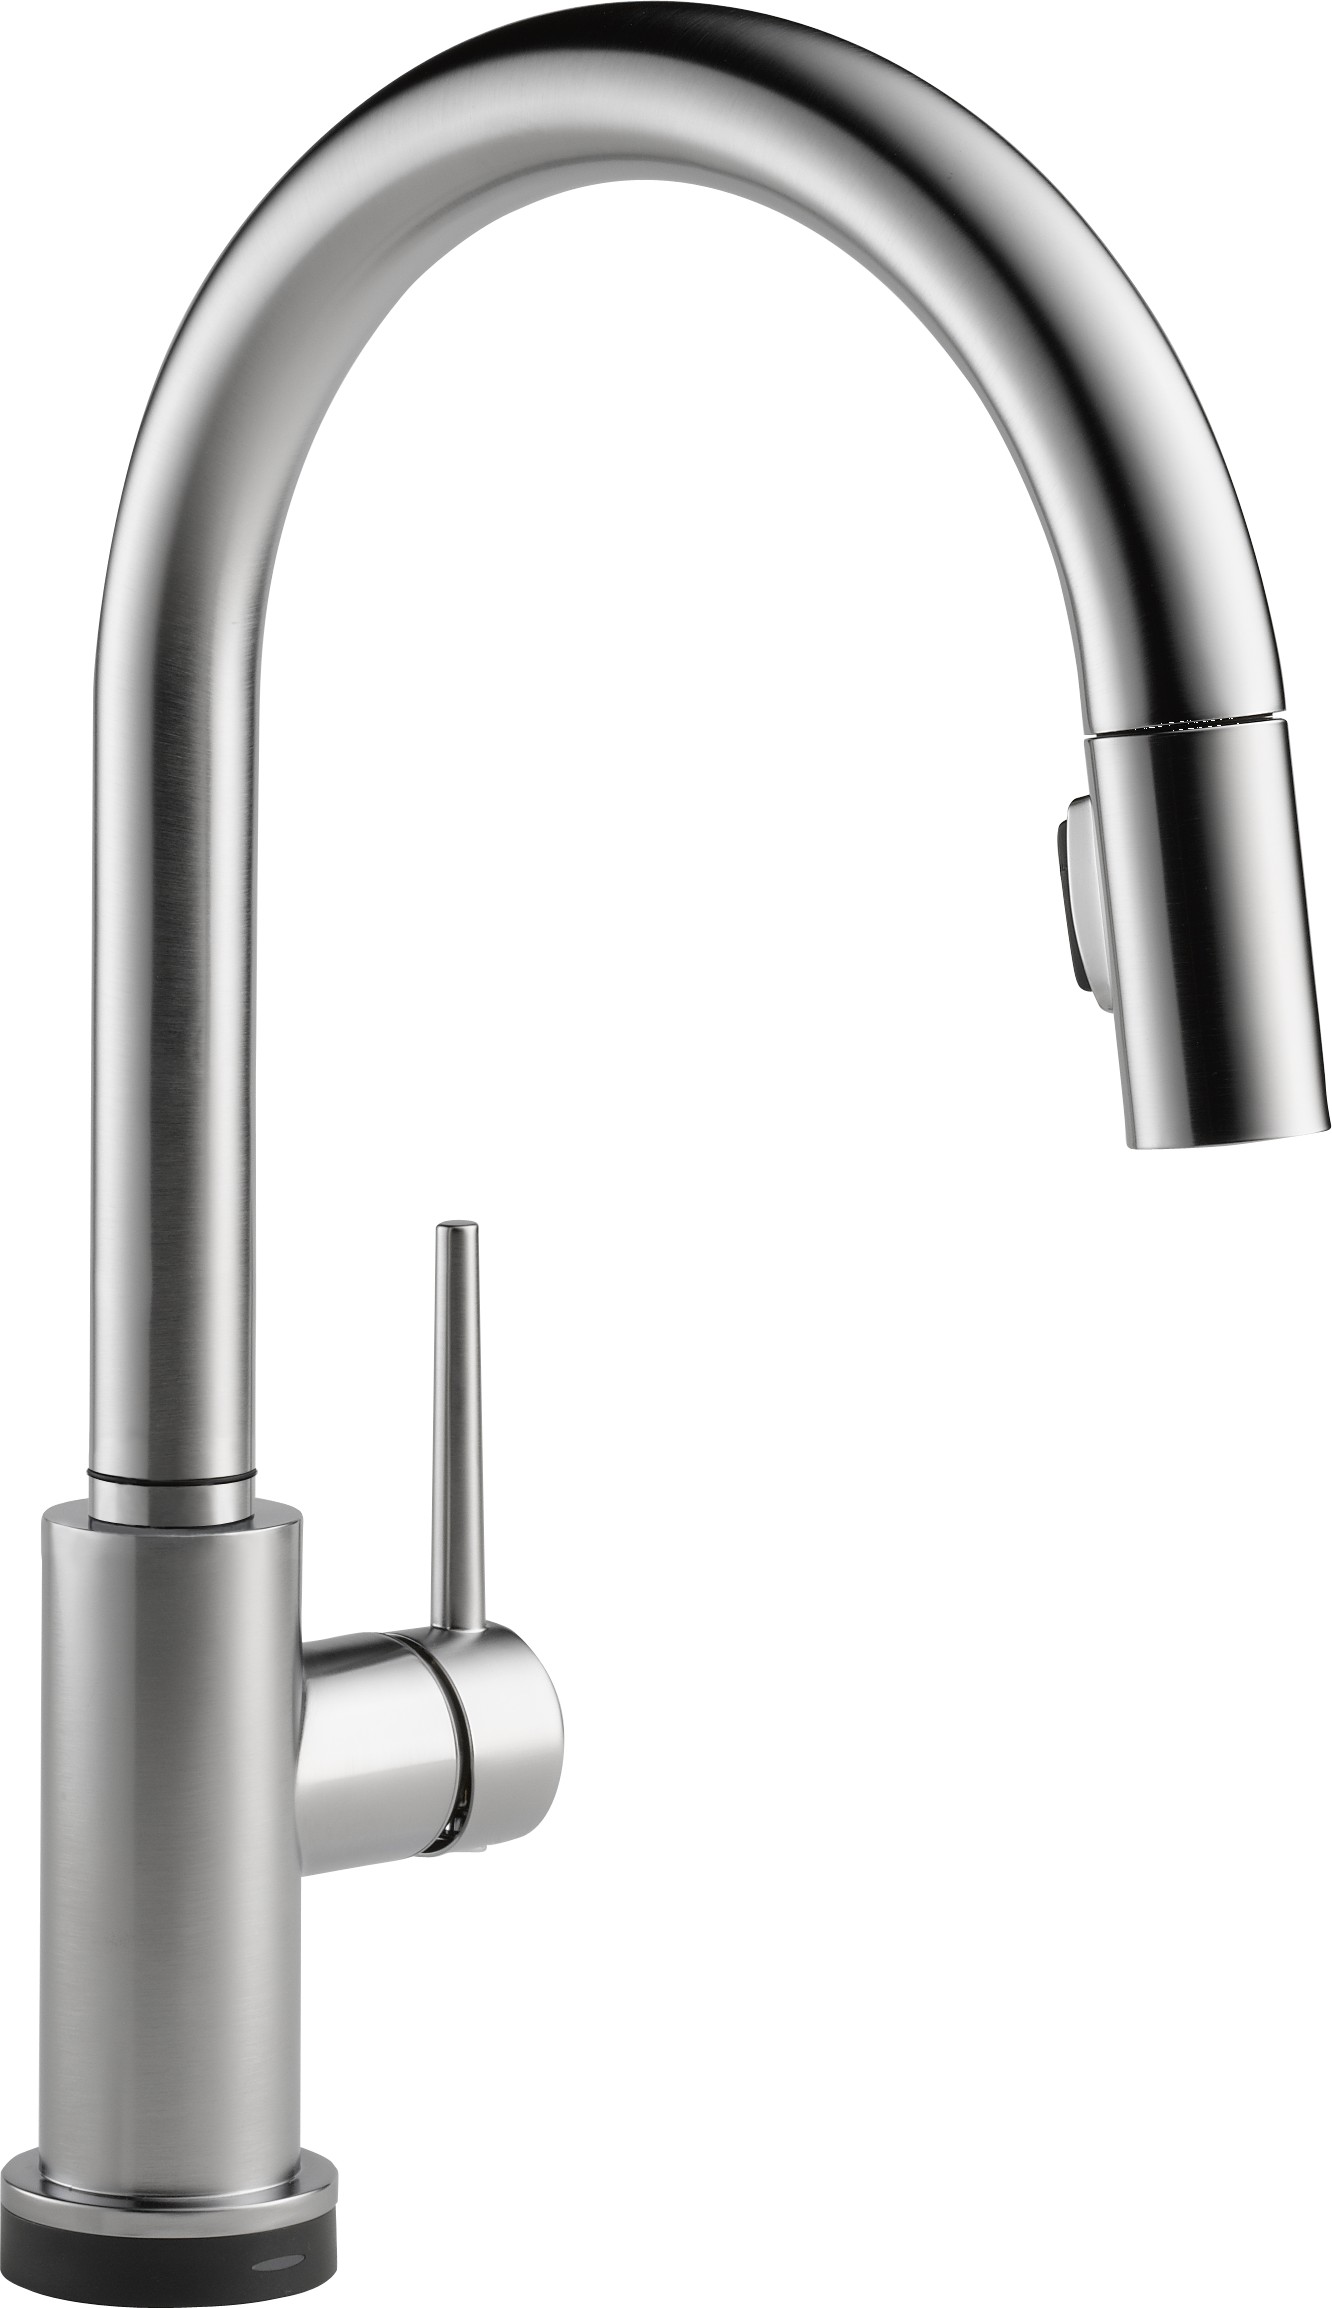 Delta-Delex-Brizo | 9159T-AR-DST | 9159T-AR-DST Arctic Stainless Delta Trinsic: Single Handle Pull-Down Kitchen Faucet Featuring Touch2O(R) Technology